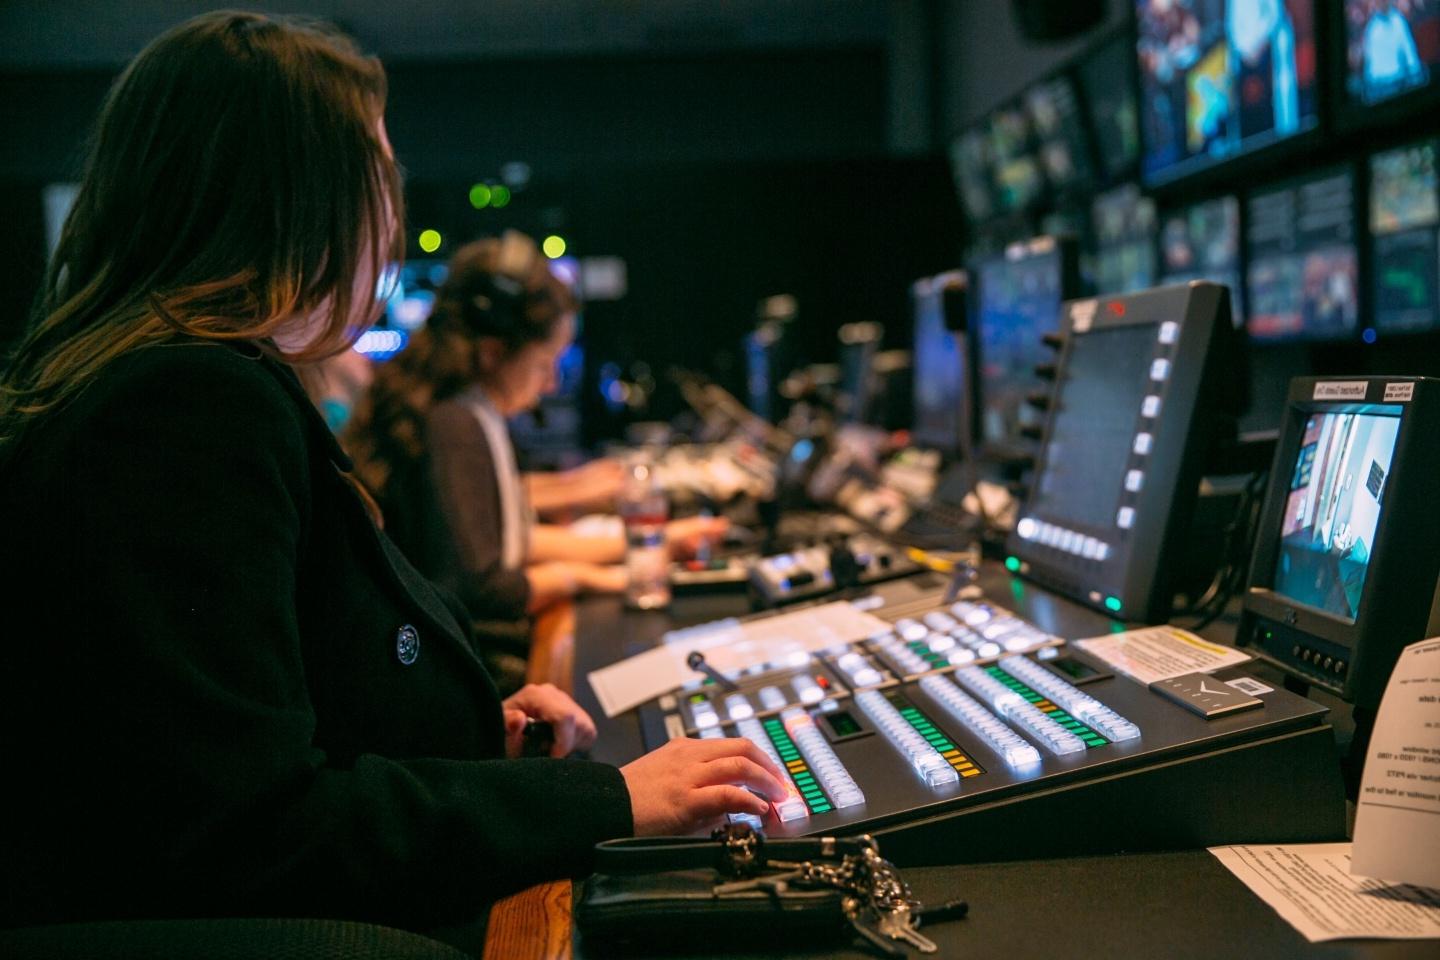 Students working in a tv control room with control boards and monitors